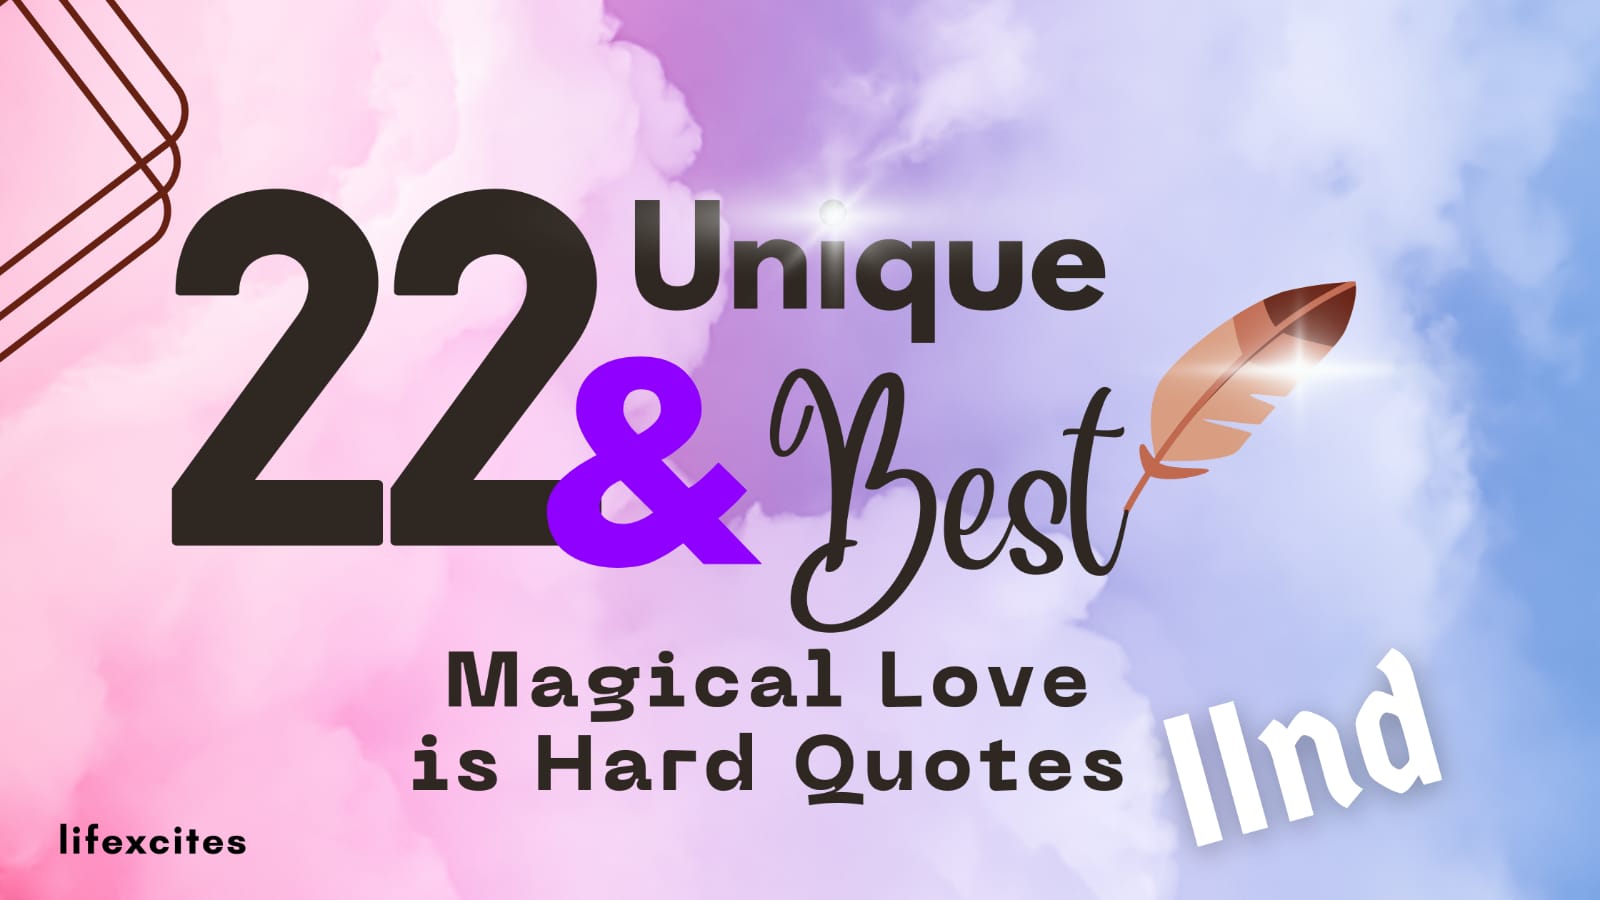 22 Unique and Best Magical Love is Hard Quotes – II